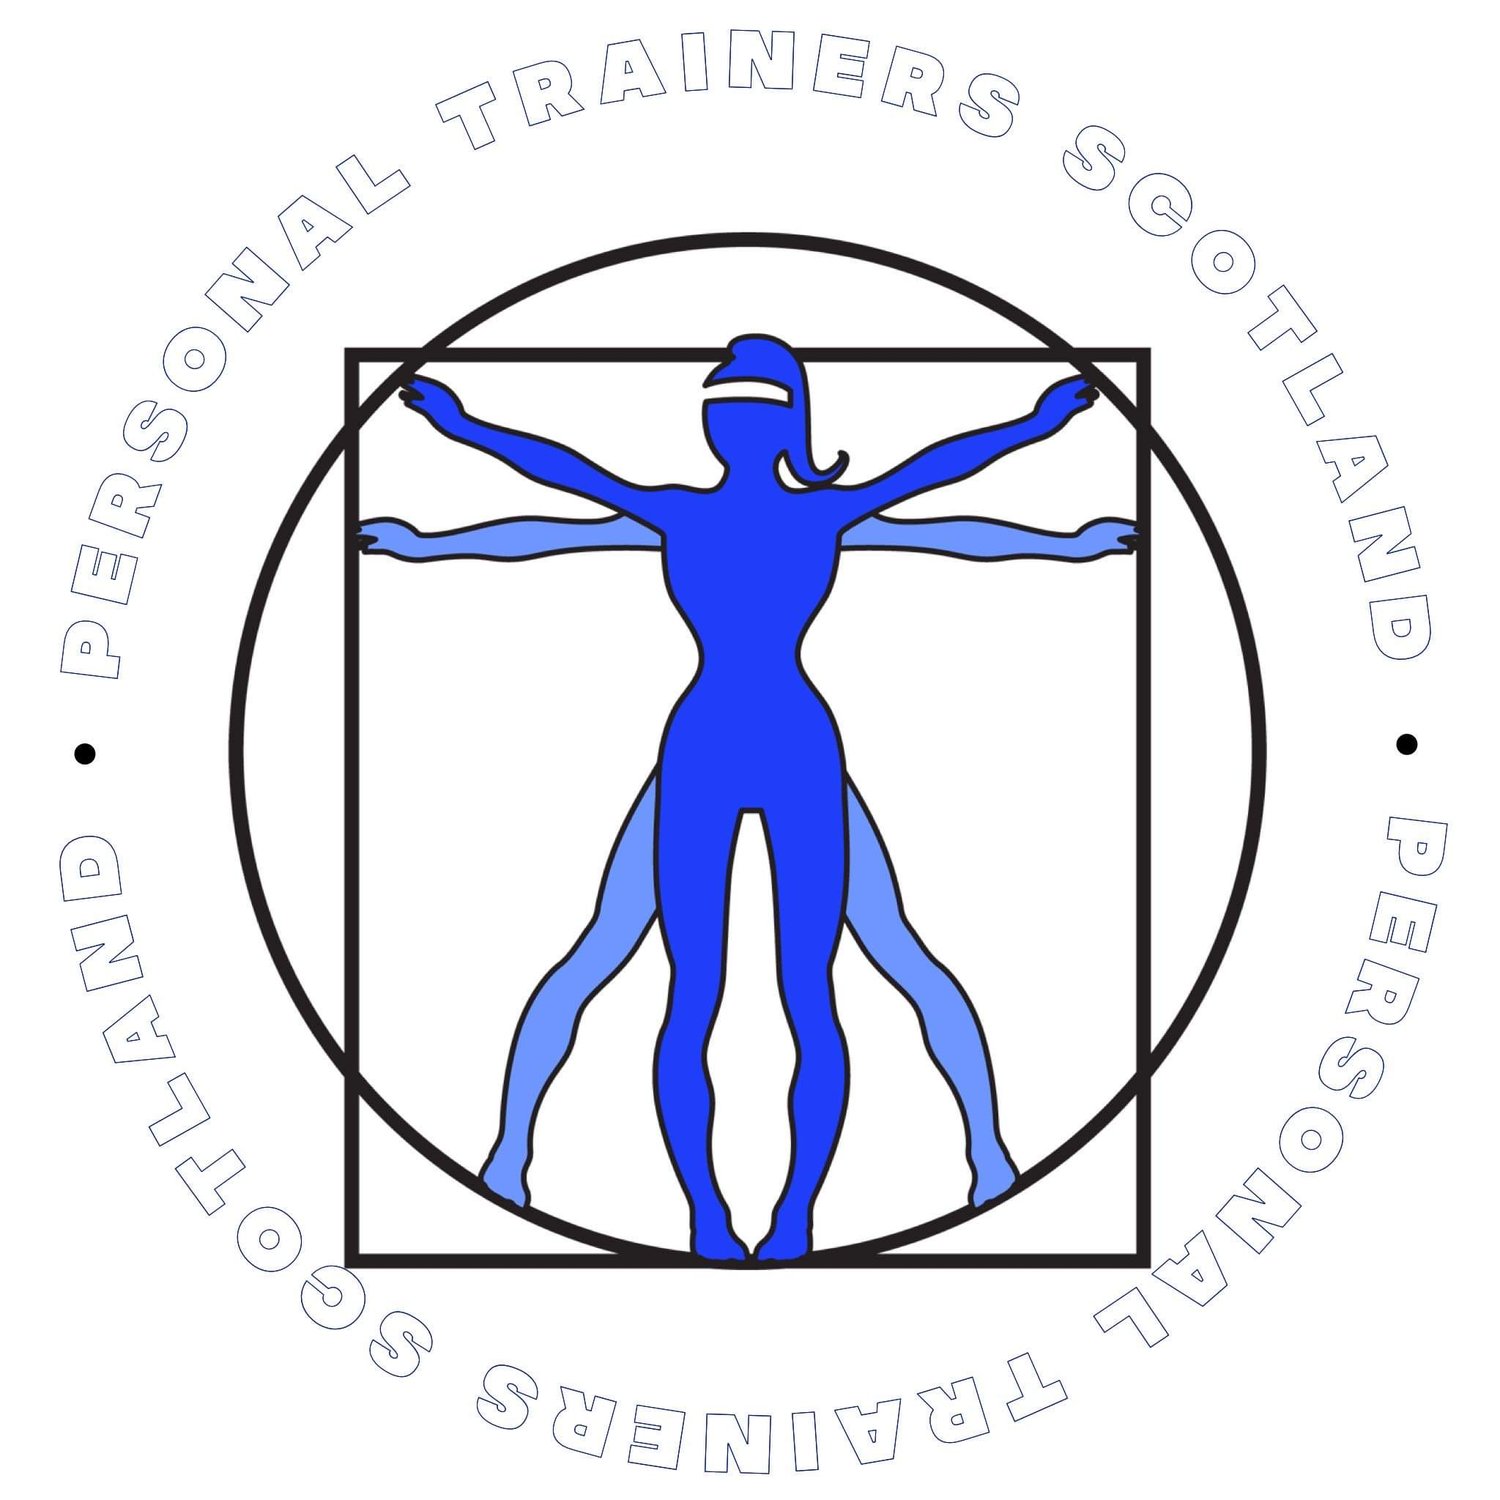 Personal Trainers Scotland